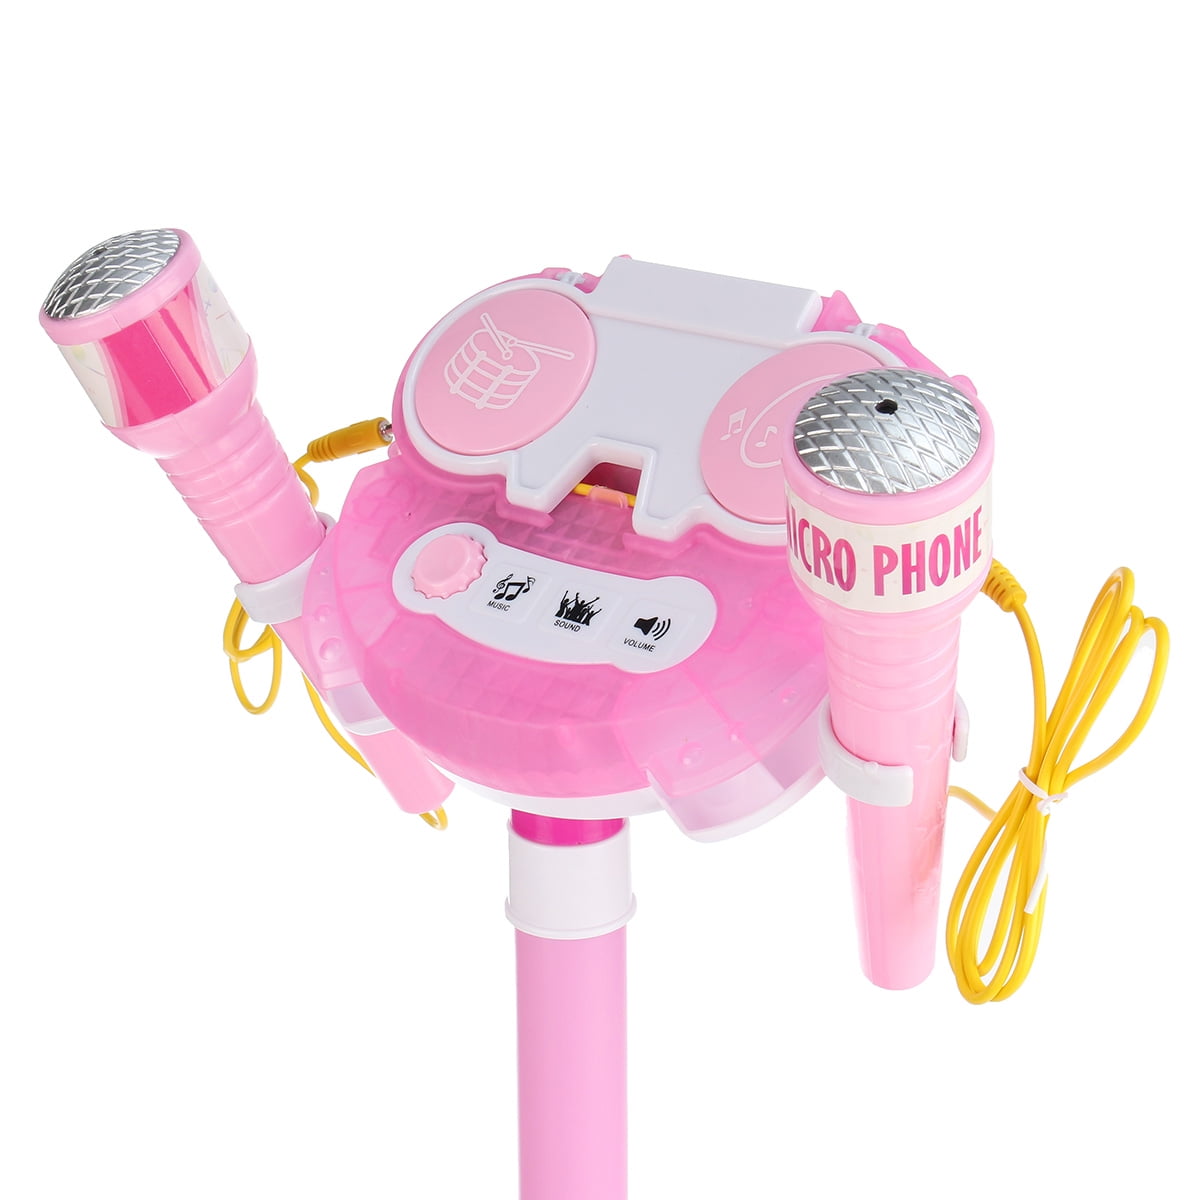 Adidome Kids Education Musical Toy Stand Type Music Microphone with Colorful Light Gift Pianos & Keyboards 